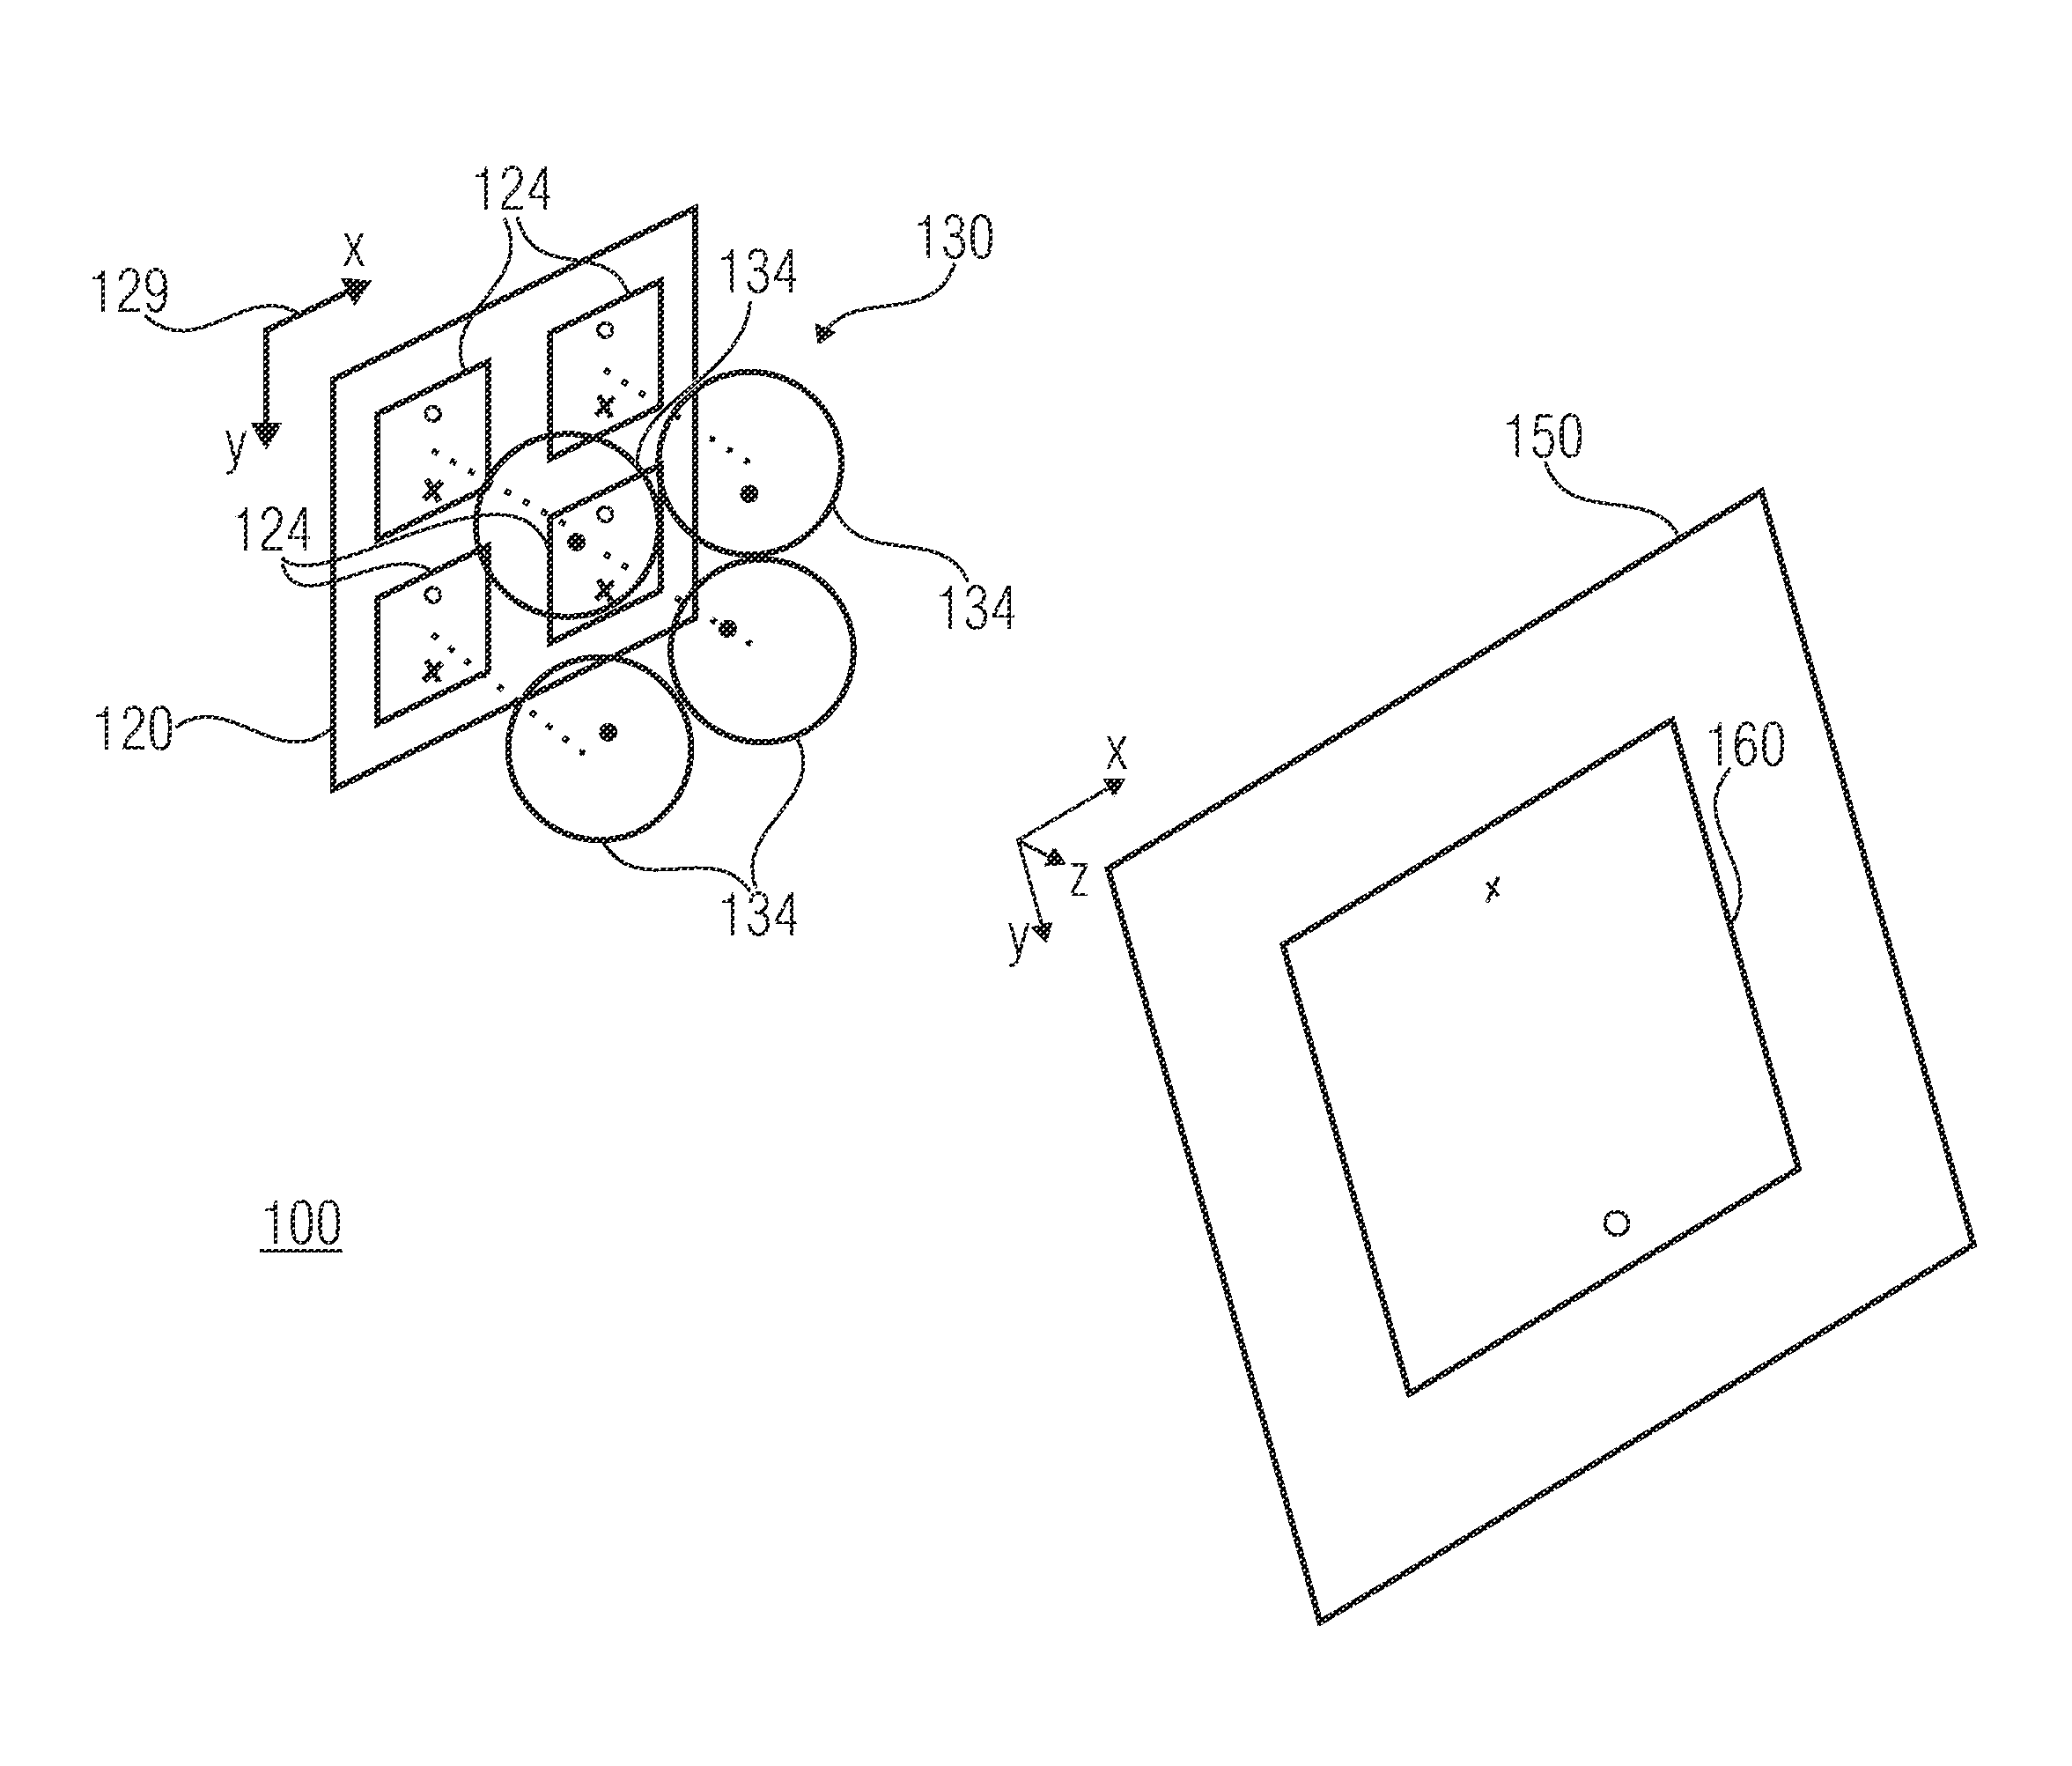 Projection display and method for displaying an overall image for projection free-form surfaces or tilted projection surfaces